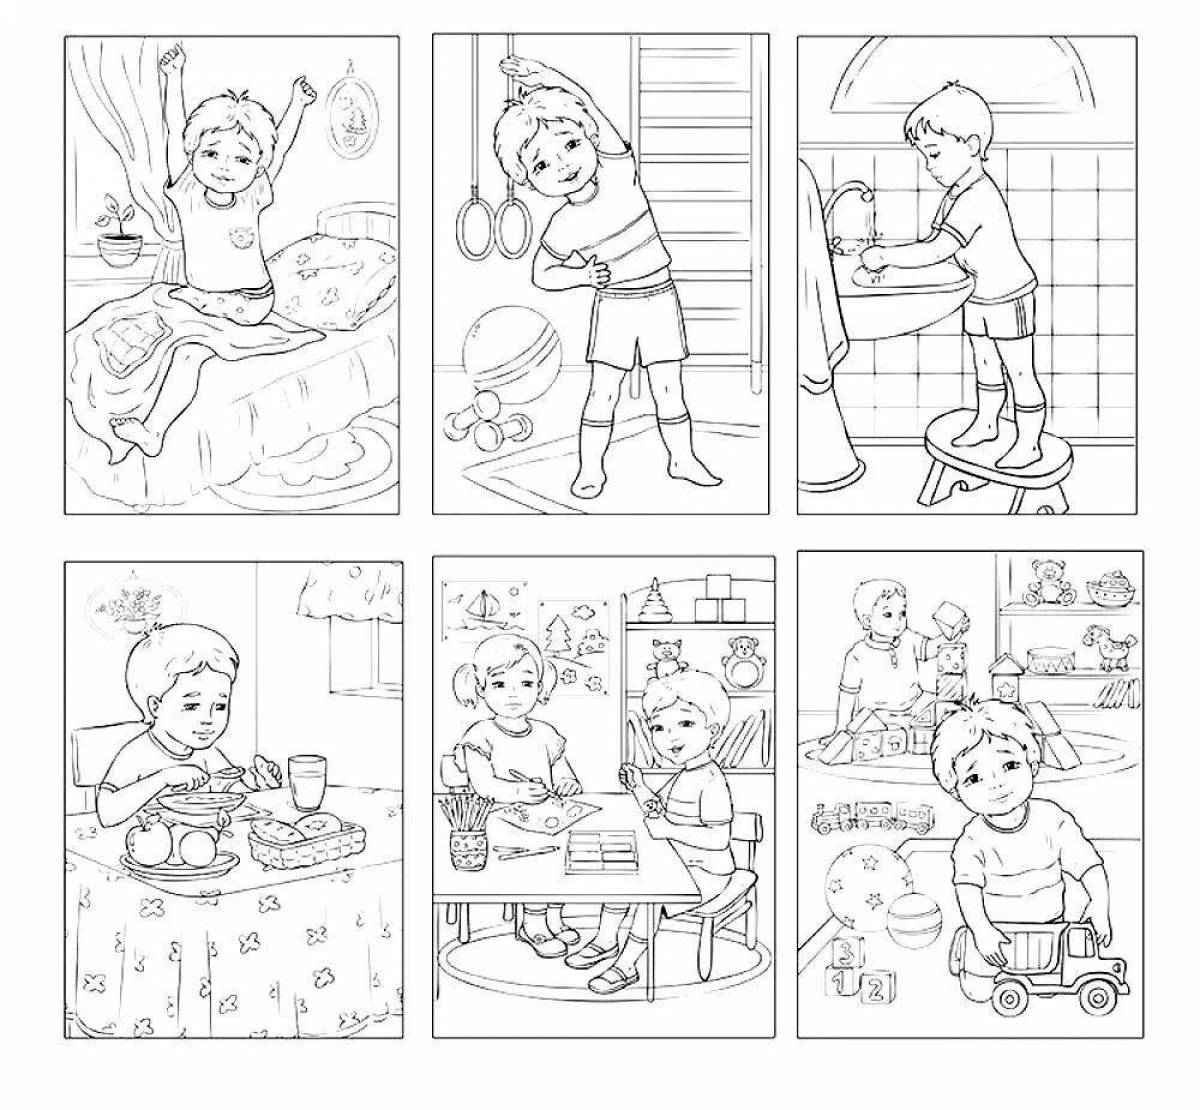 Charming time of day coloring book